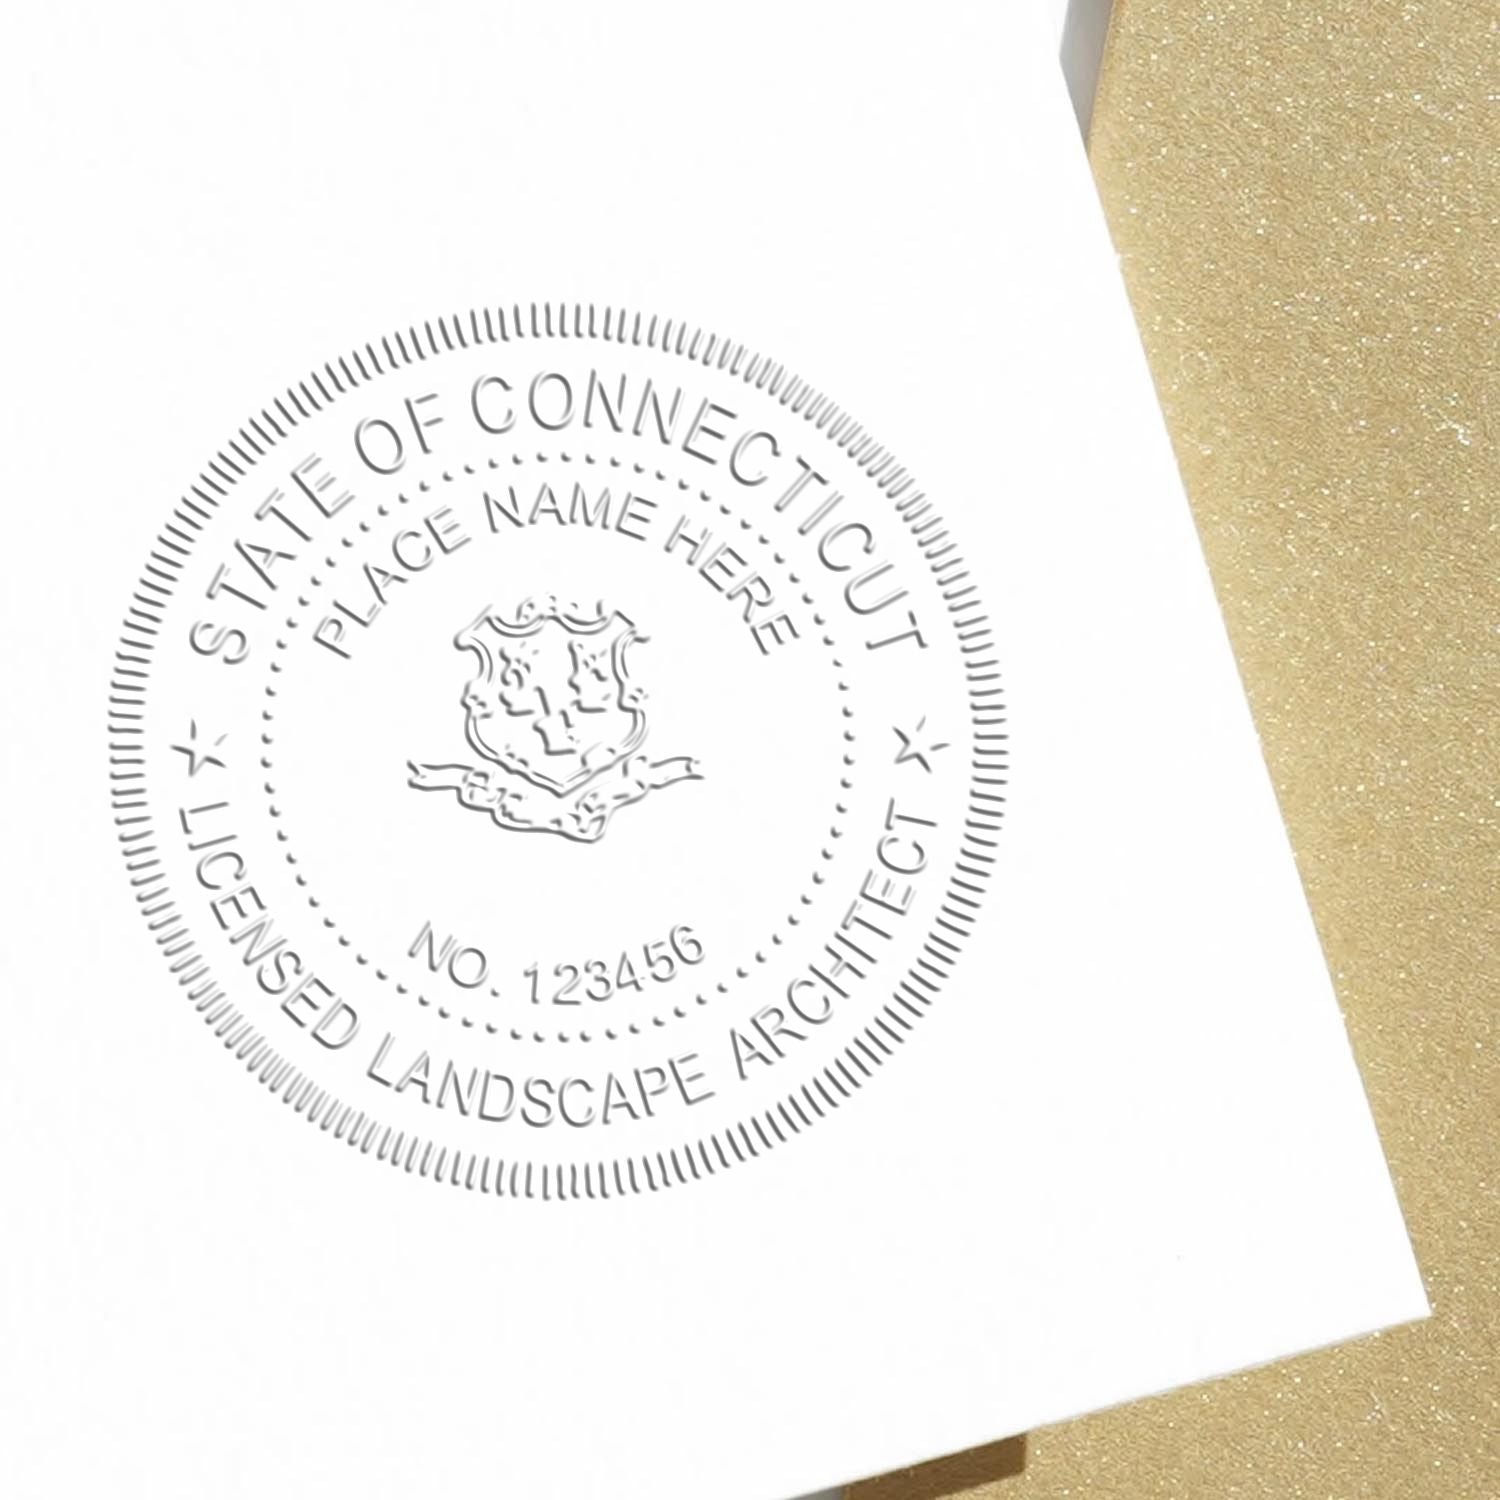 Another Example of a stamped impression of the State of Connecticut Extended Long Reach Landscape Architect Seal Embosser on a piece of office paper.